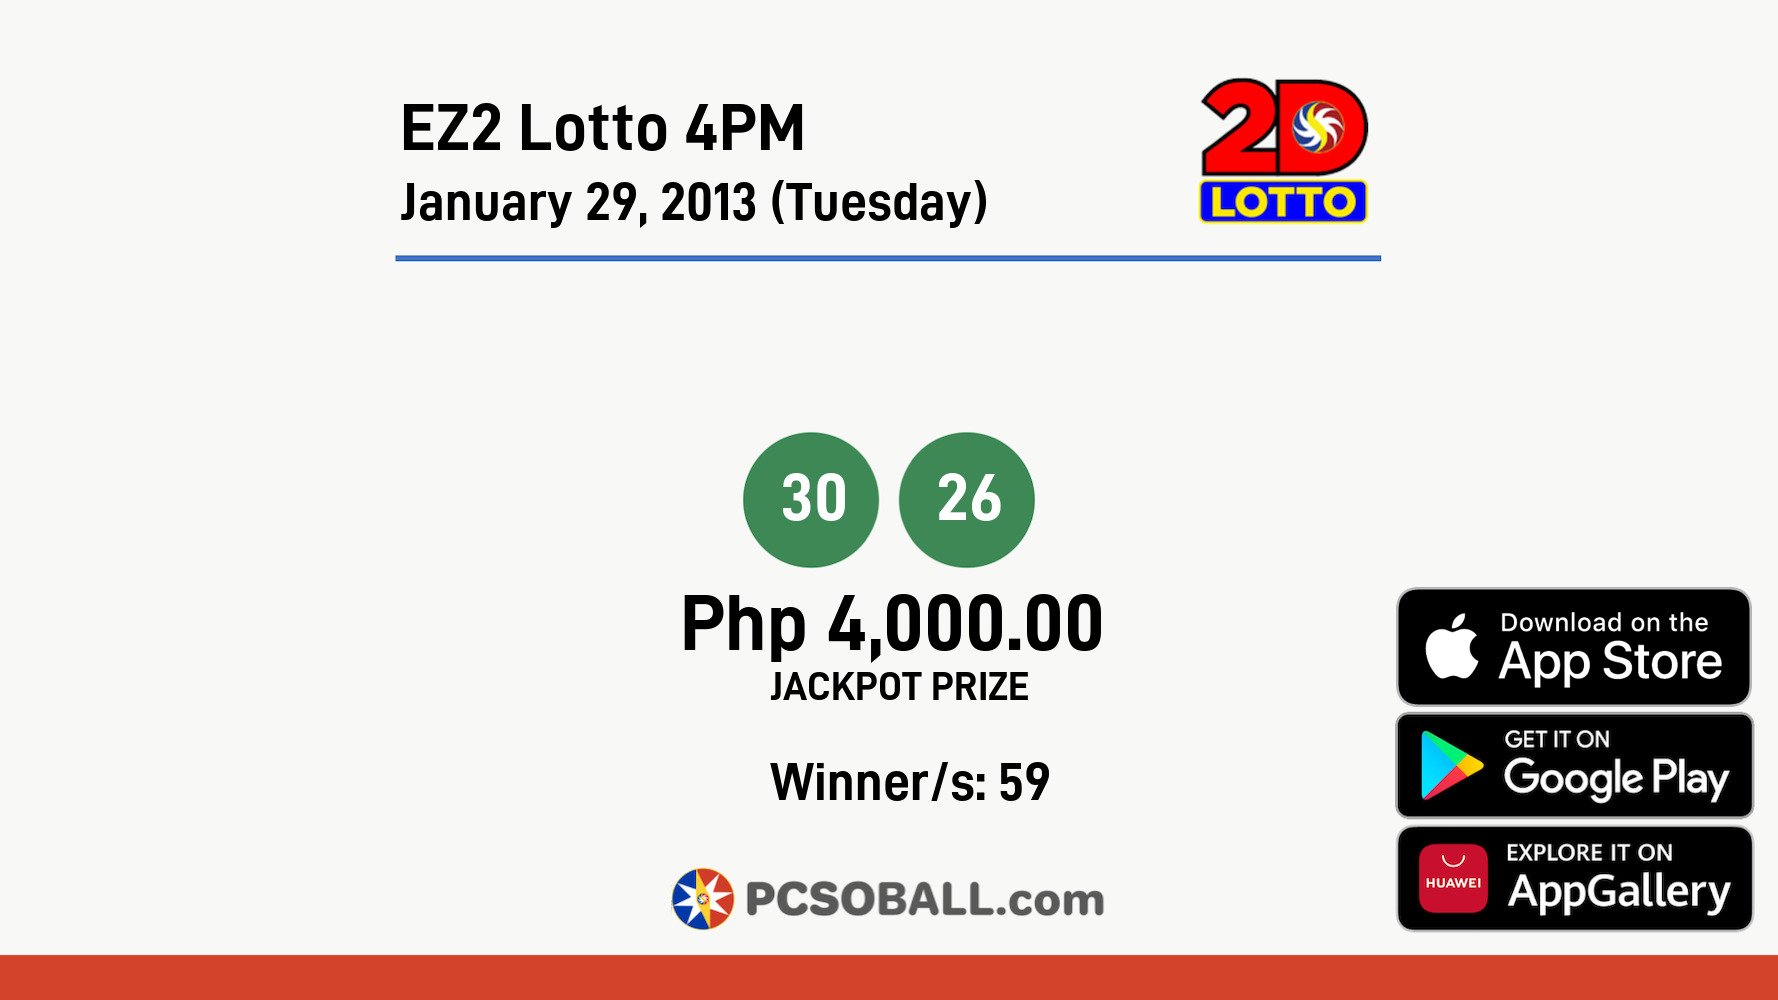 EZ2 Lotto 4PM January 29, 2013 (Tuesday) Result